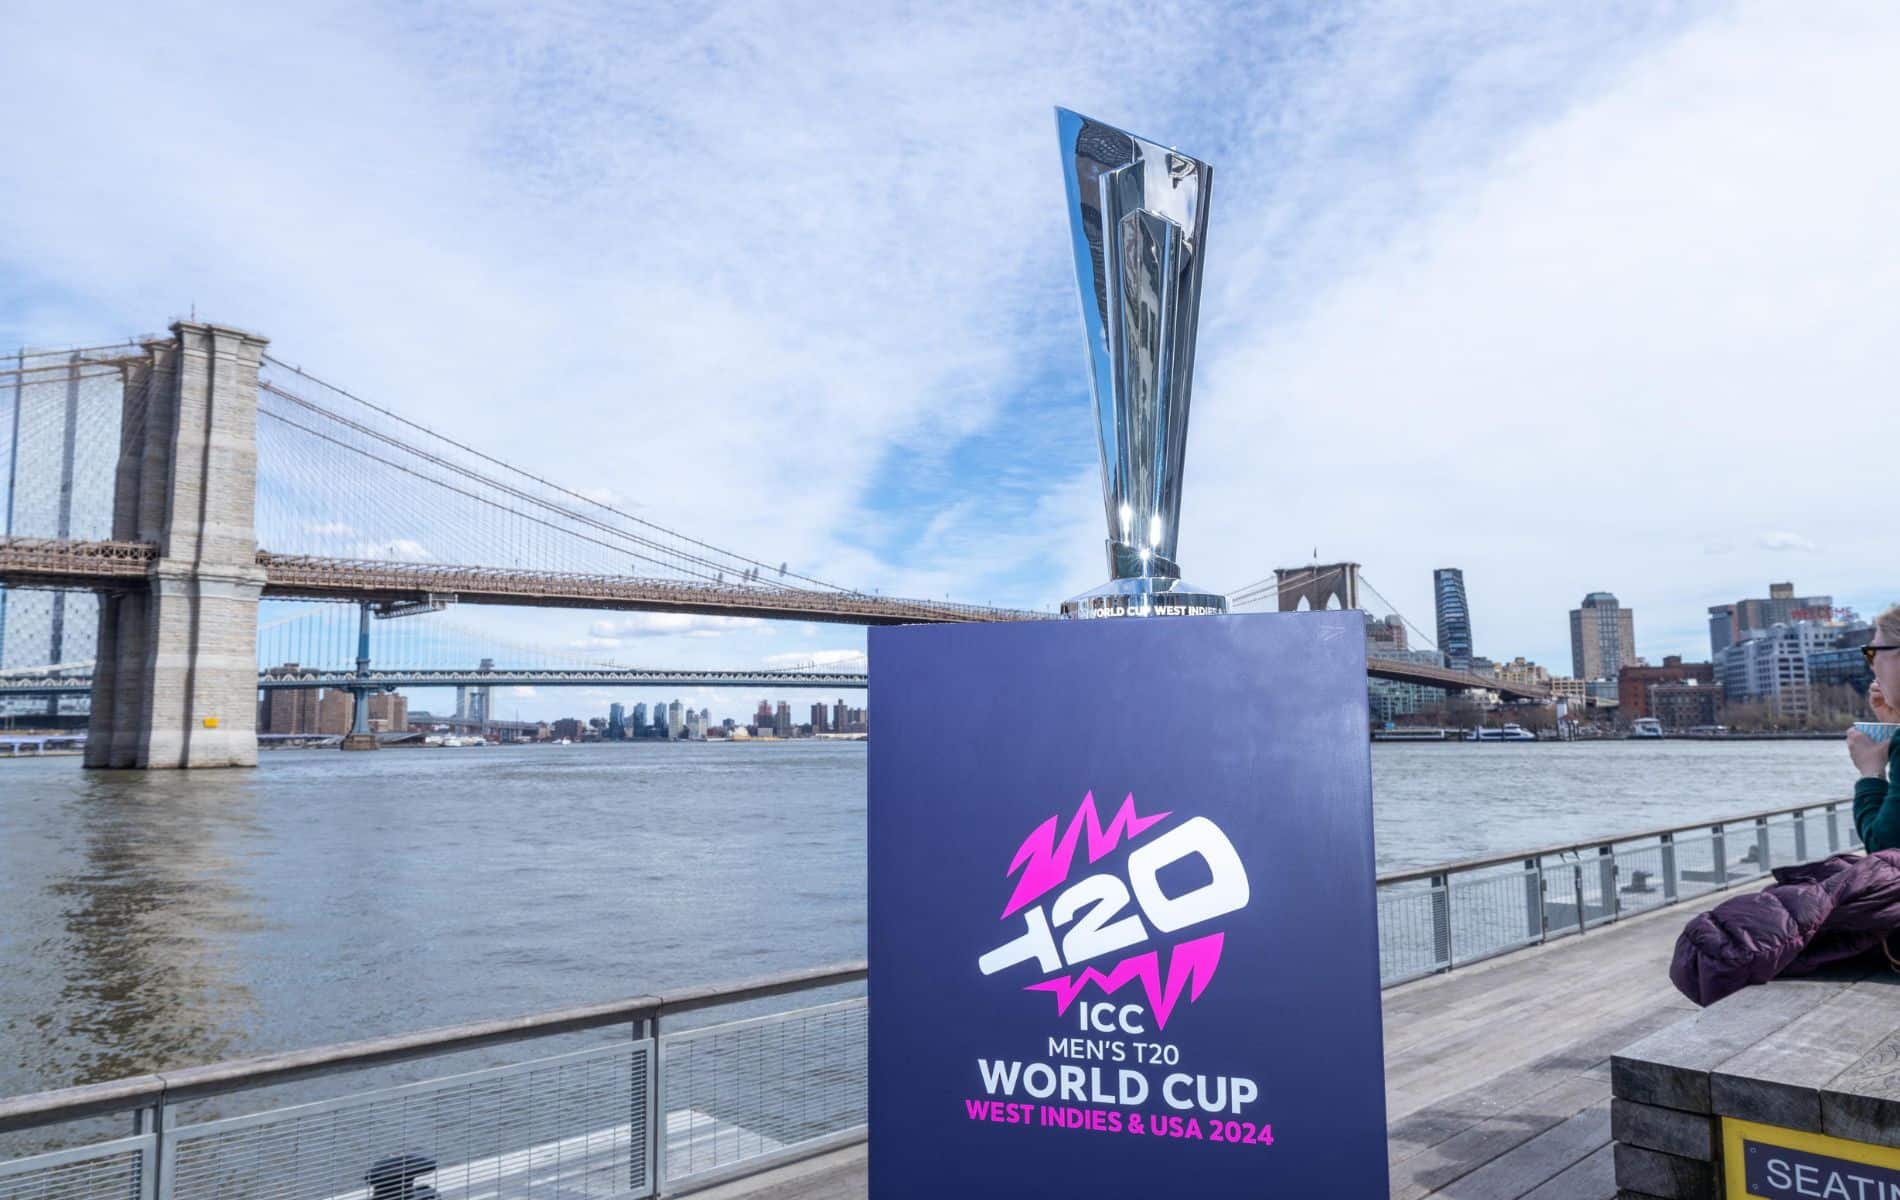 ICC T20 World Cup begins from June 1 (X)